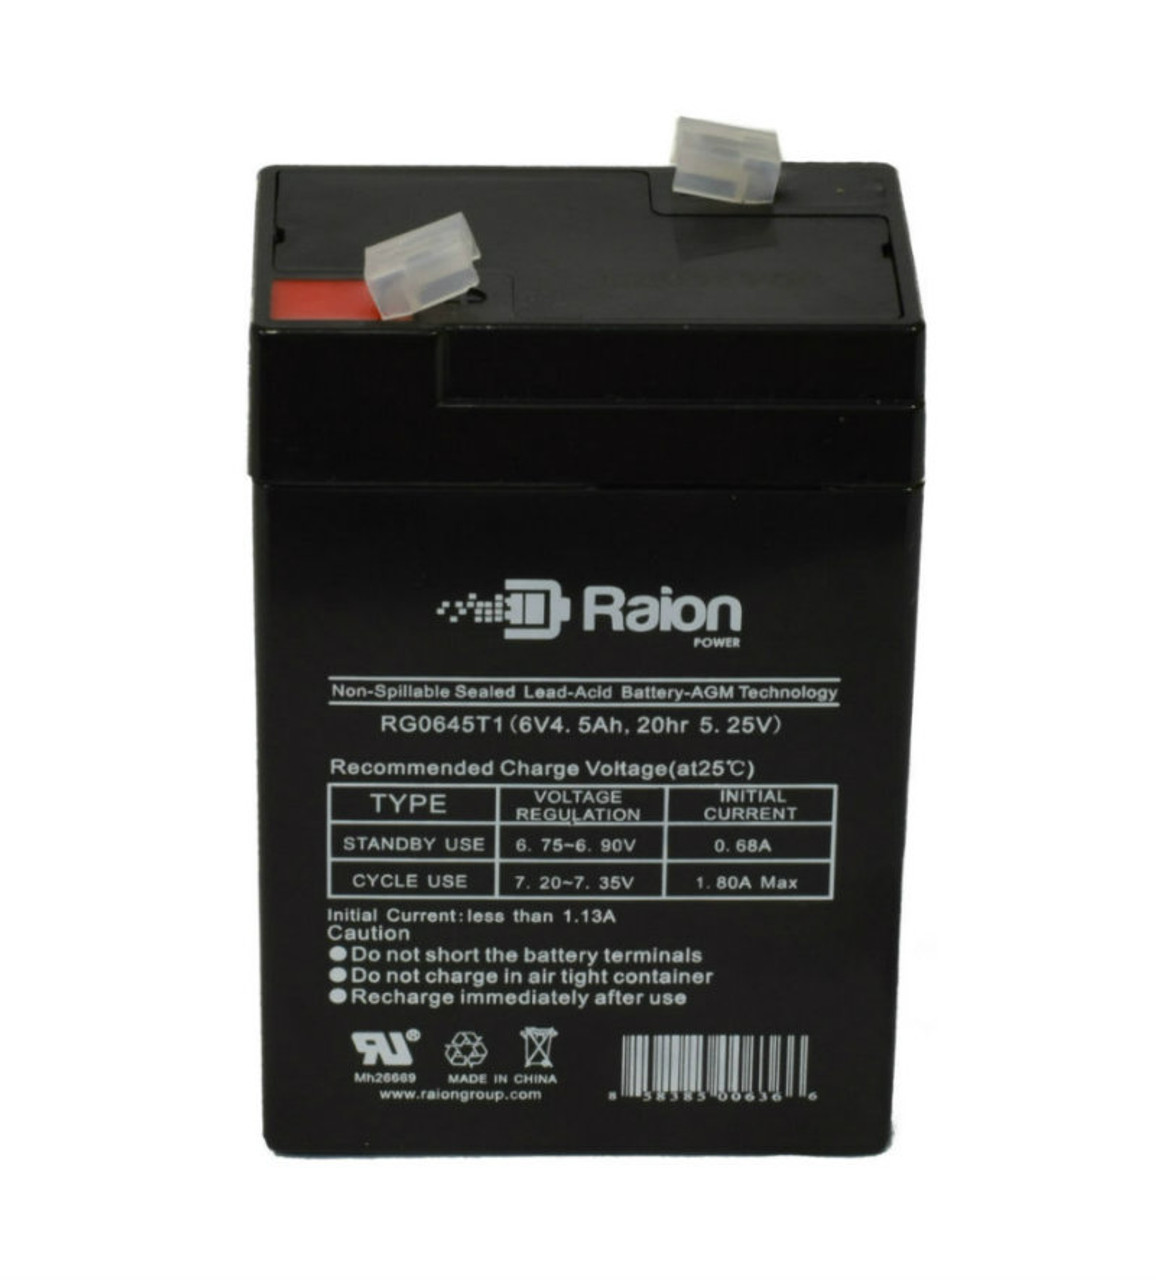 Raion Power RG0645T1 Replacement Battery Cartridge for Nellcor N1000 Pulse Oximeter